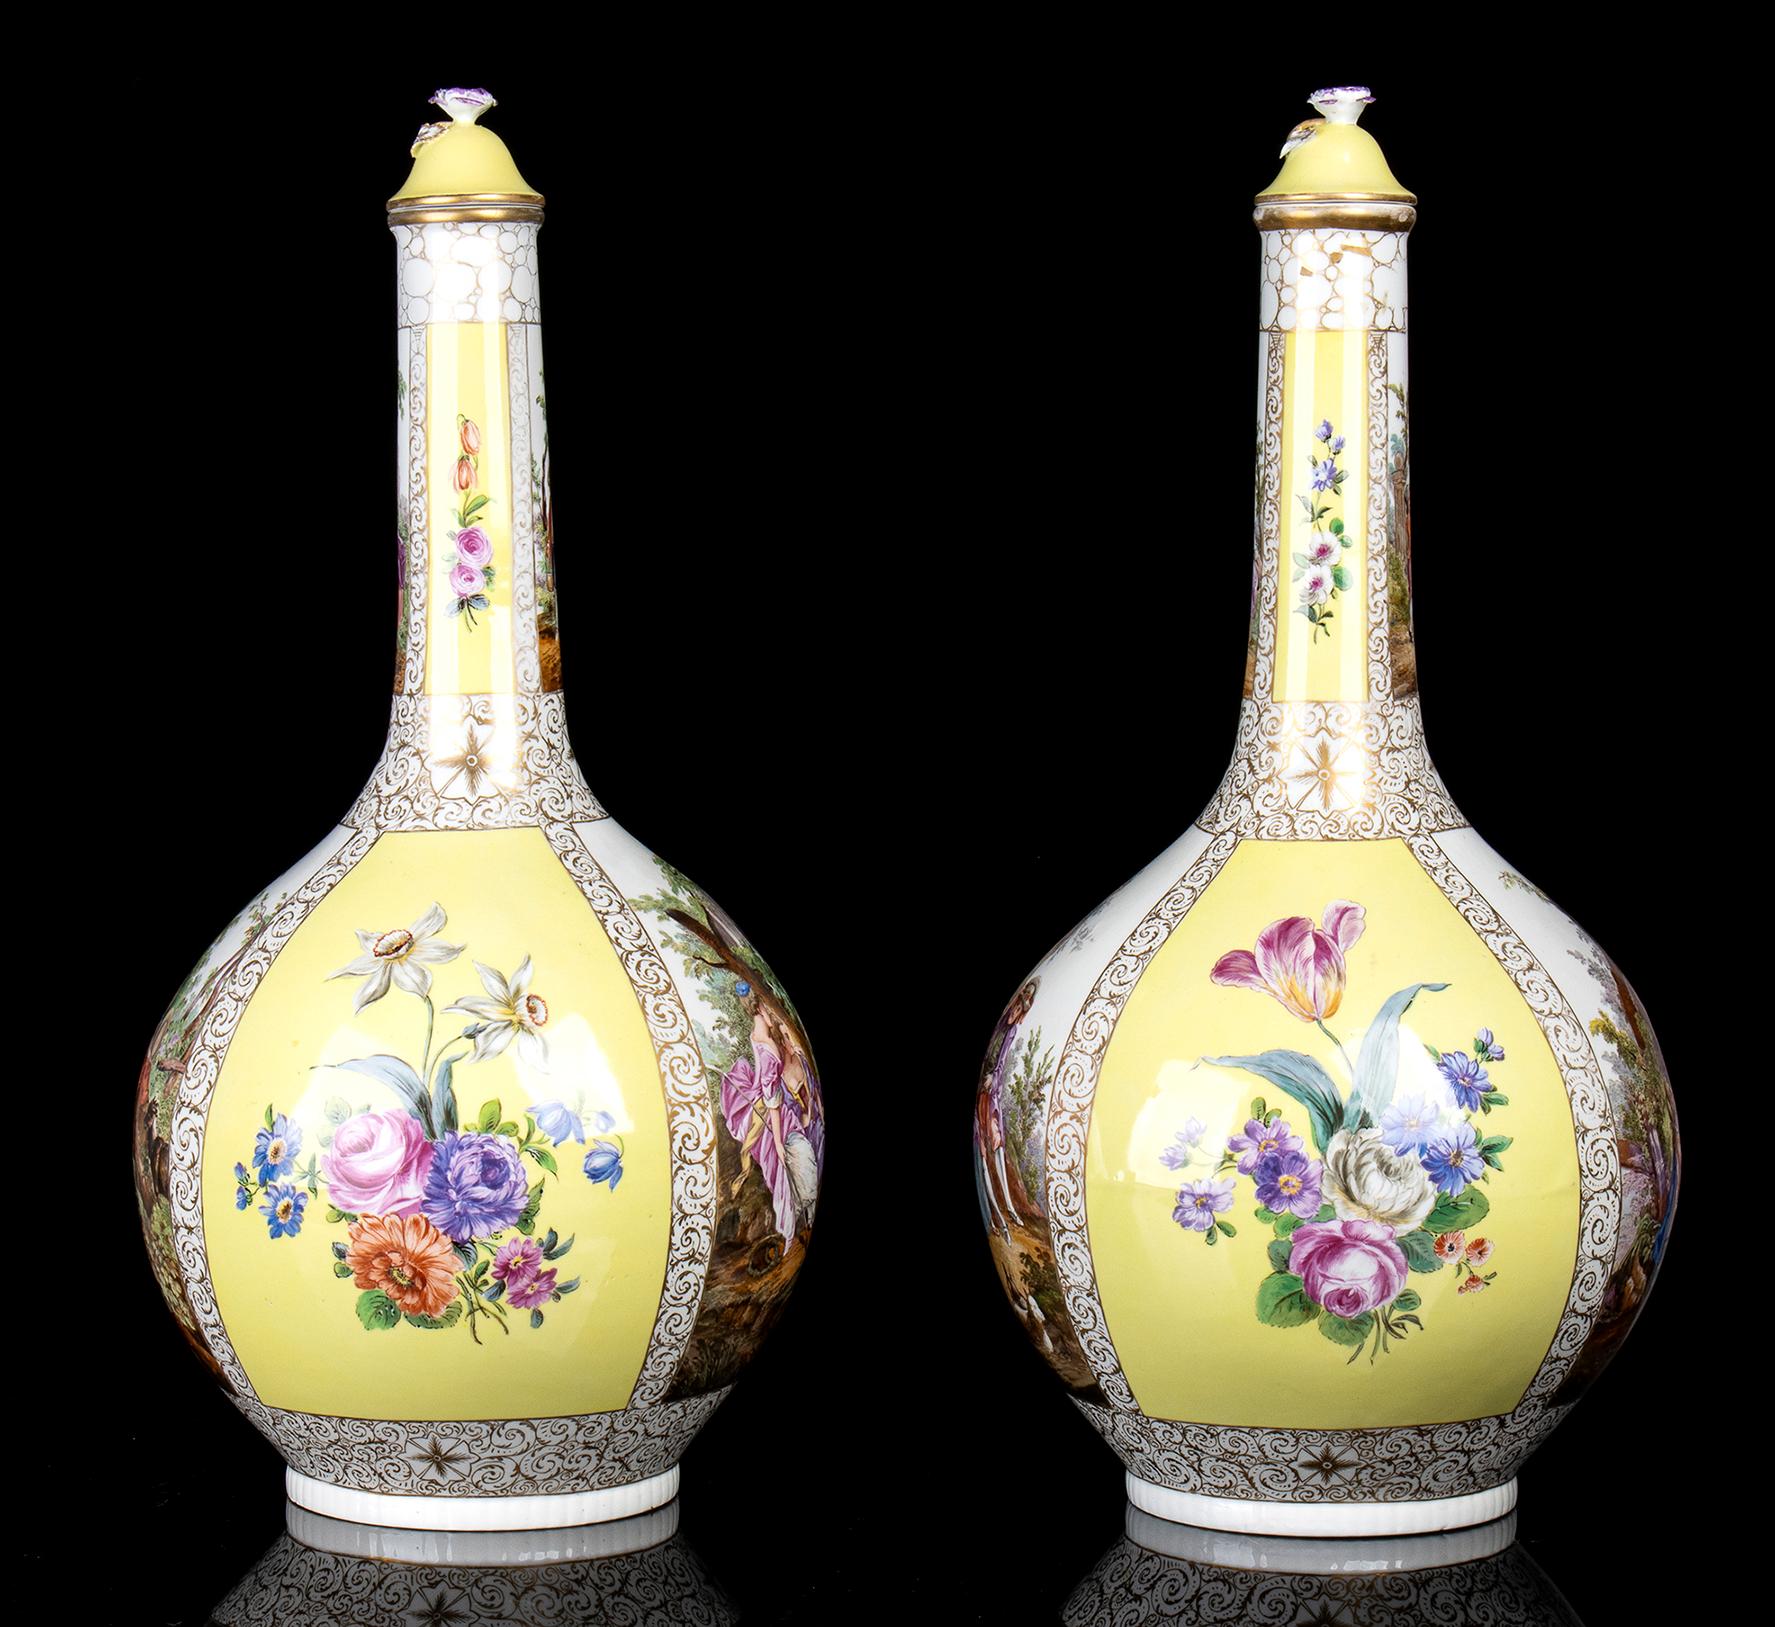 Pair of porcelain vases - Germany, 19th century
Polychrome four-part decoration depicting gallant scenes. Marks under base.

Height x diameter: 54 x 27 cm.

Item condition grading: ***** excellent.